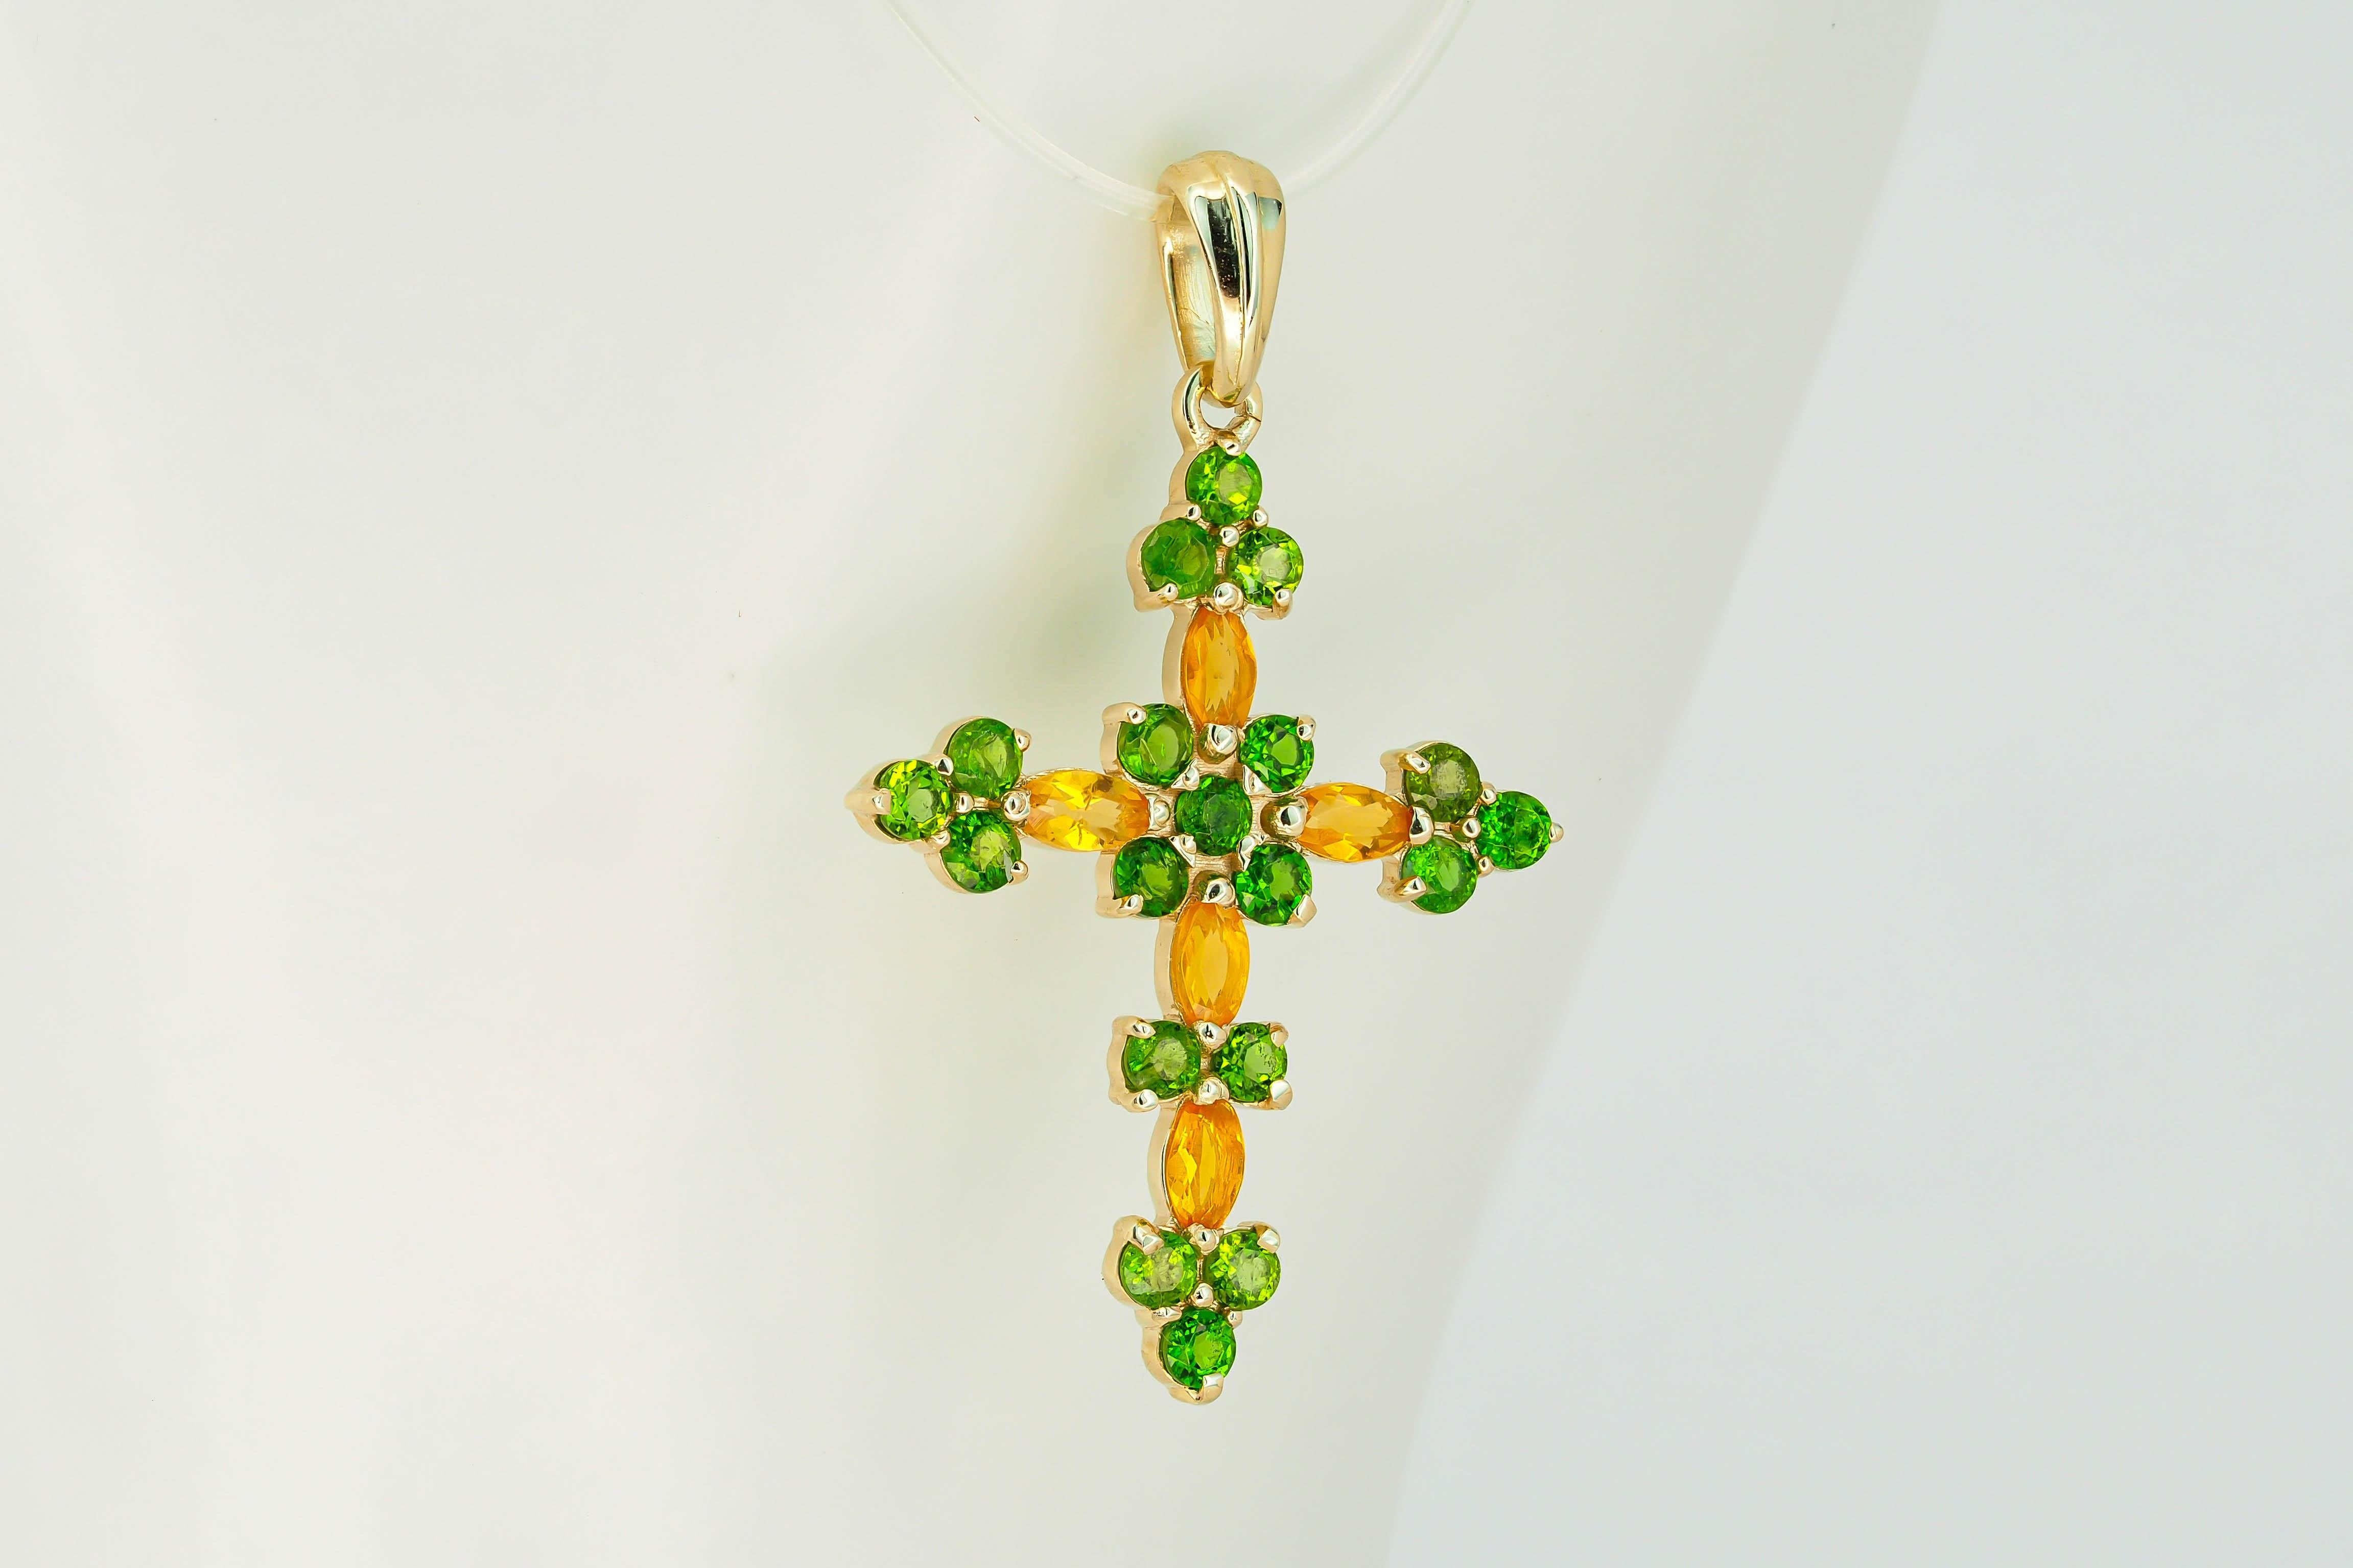 14k Gold Cross Pendant with Colored Stones Opals and Tsavorites 2